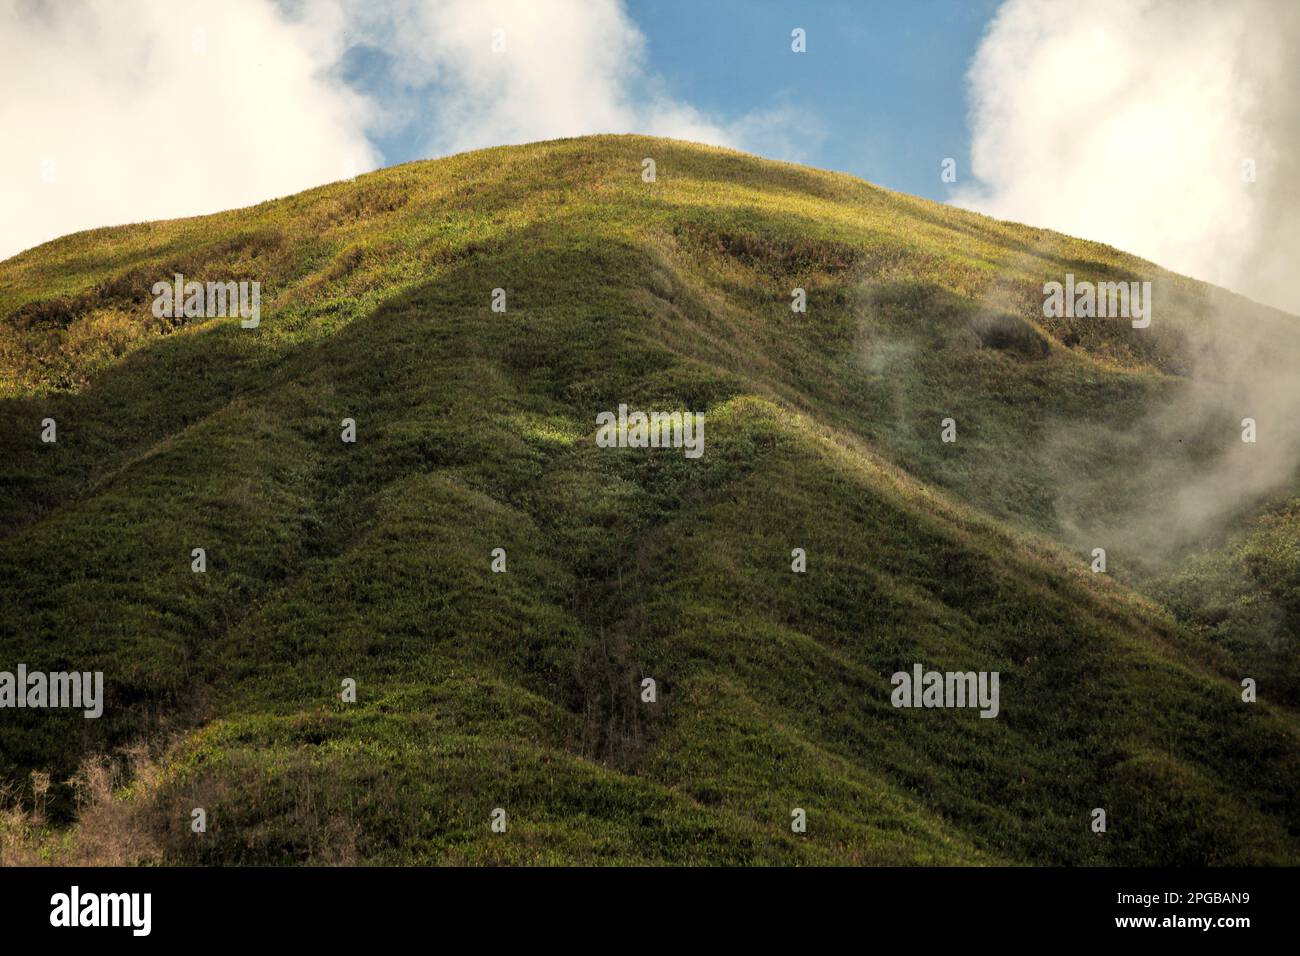 Vegetation of shrubs and bushes on the slopes of Mount Lokon, an active volcano in Tomohon, North Sulawesi, Indonesia. Stock Photo